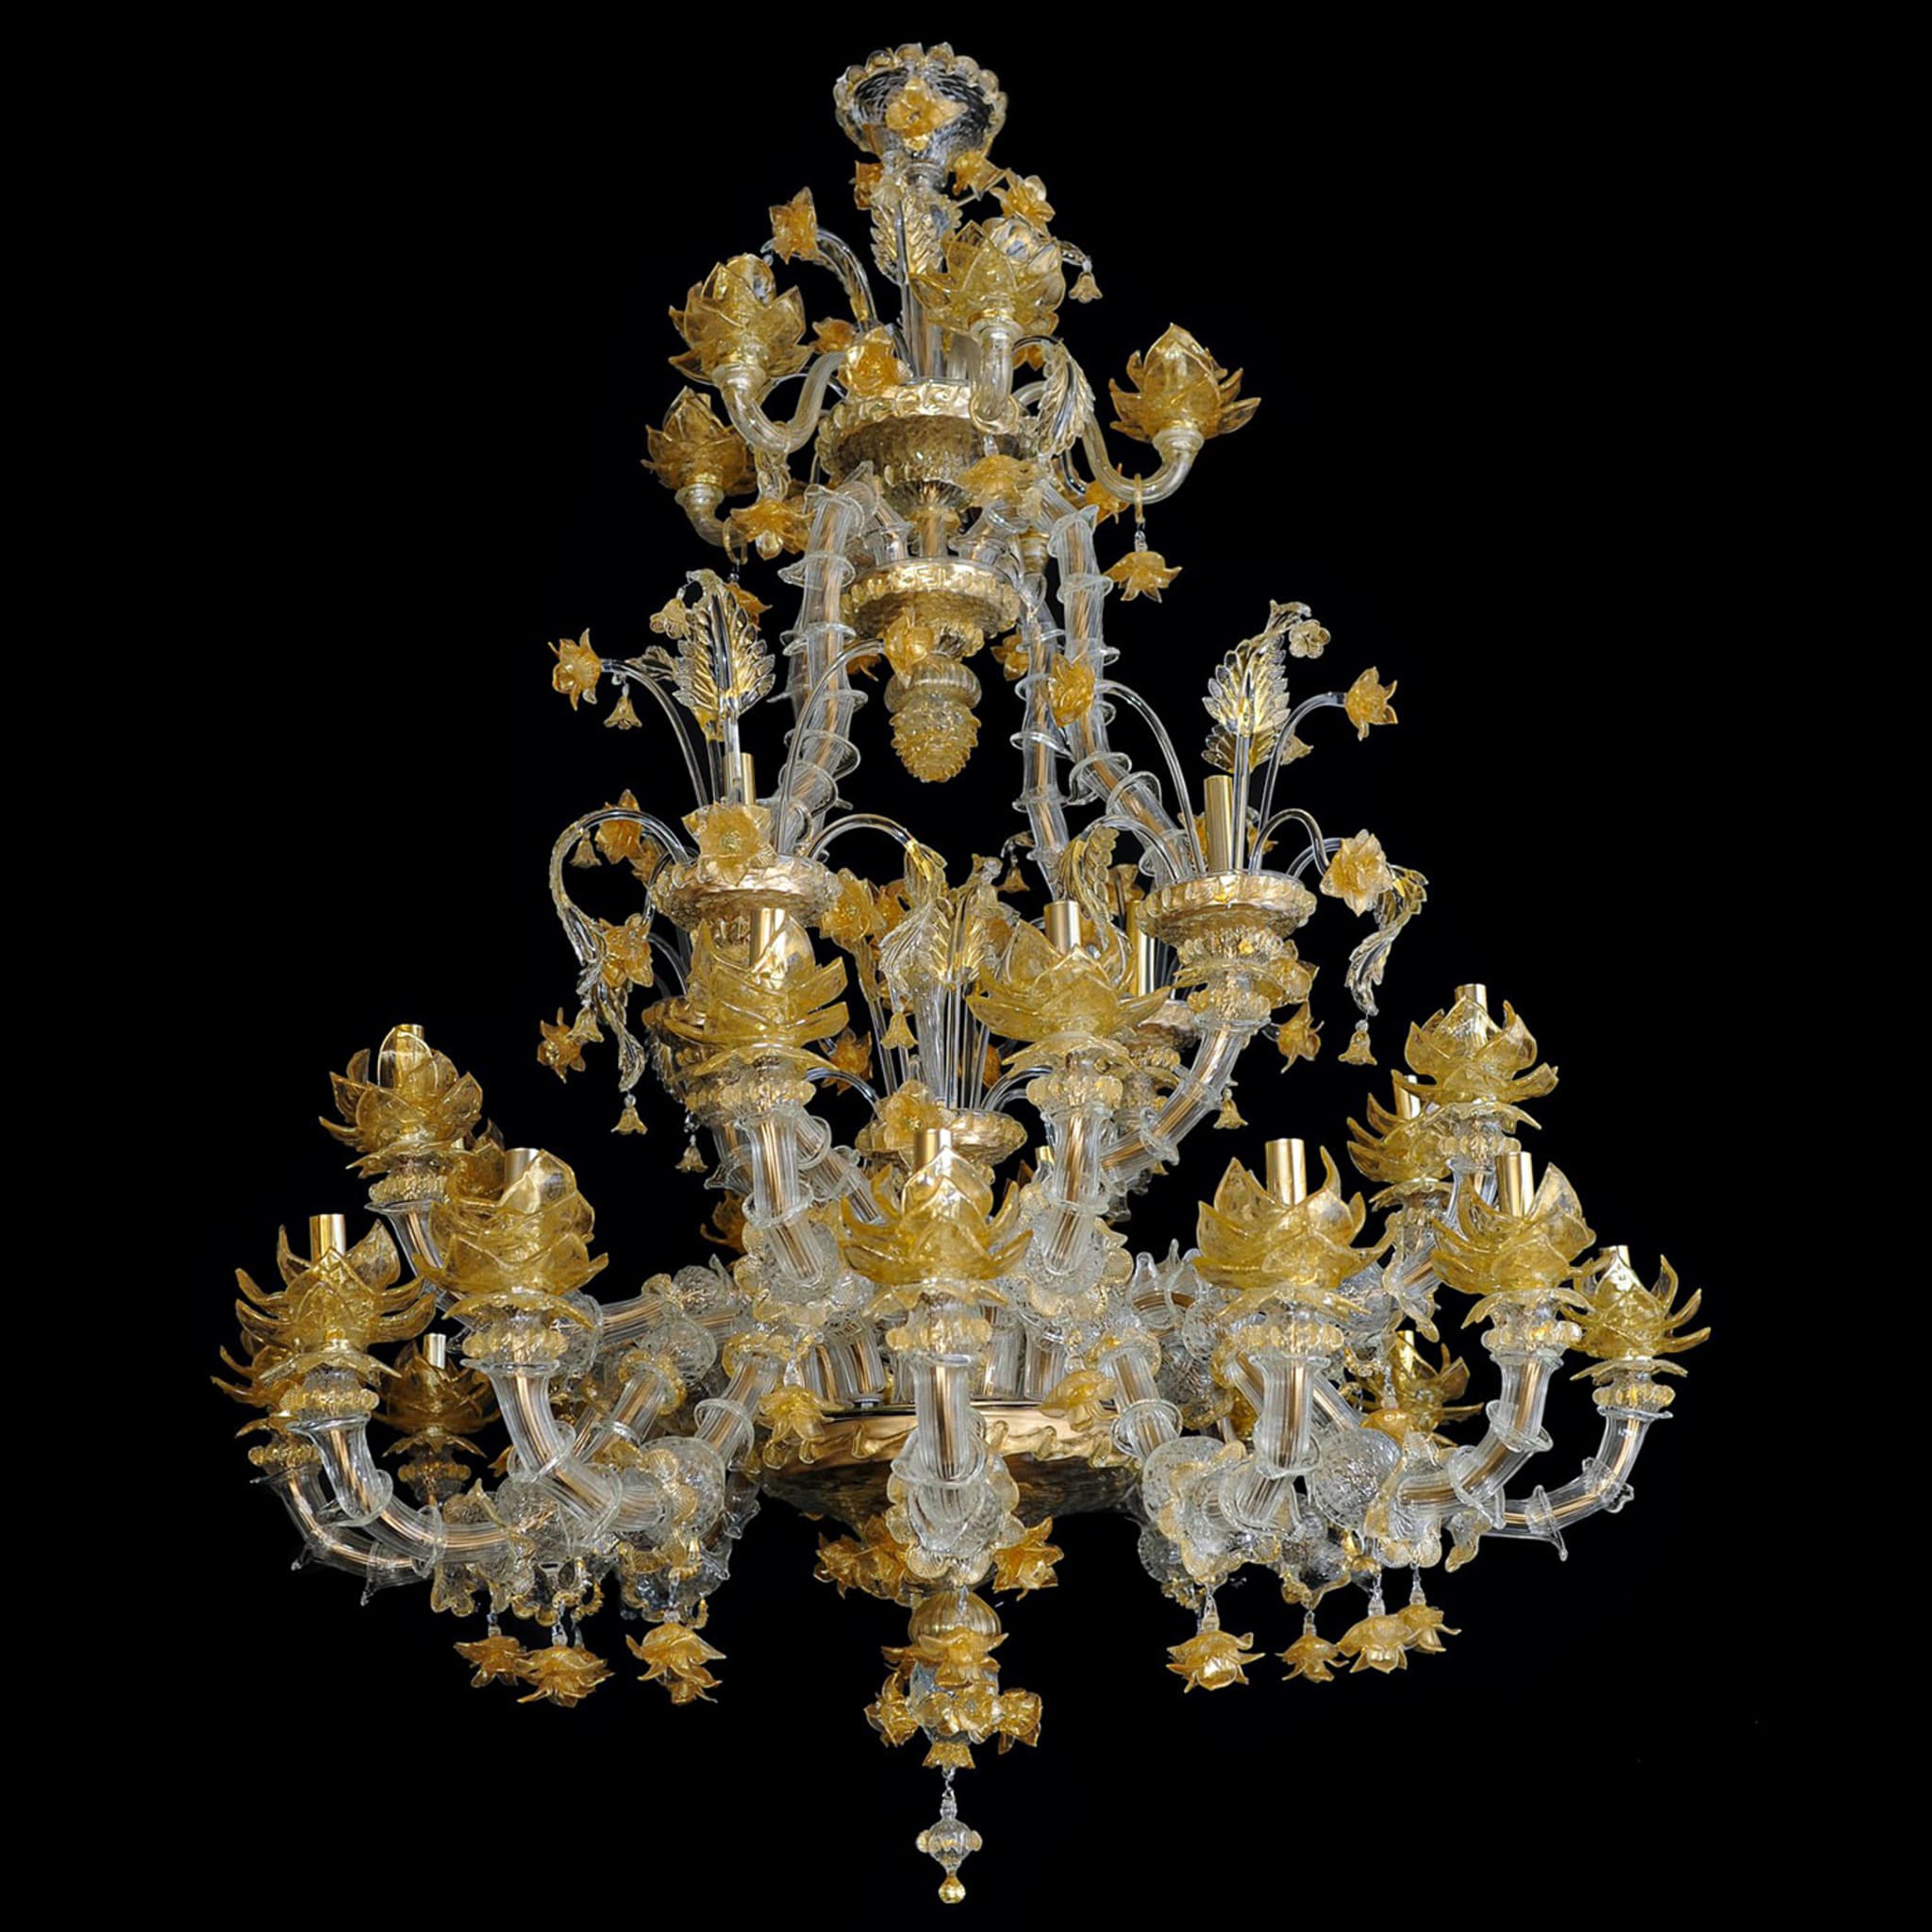 Rezzonico-style Gold and Crystal Chandelier #4 - Alternative view 1